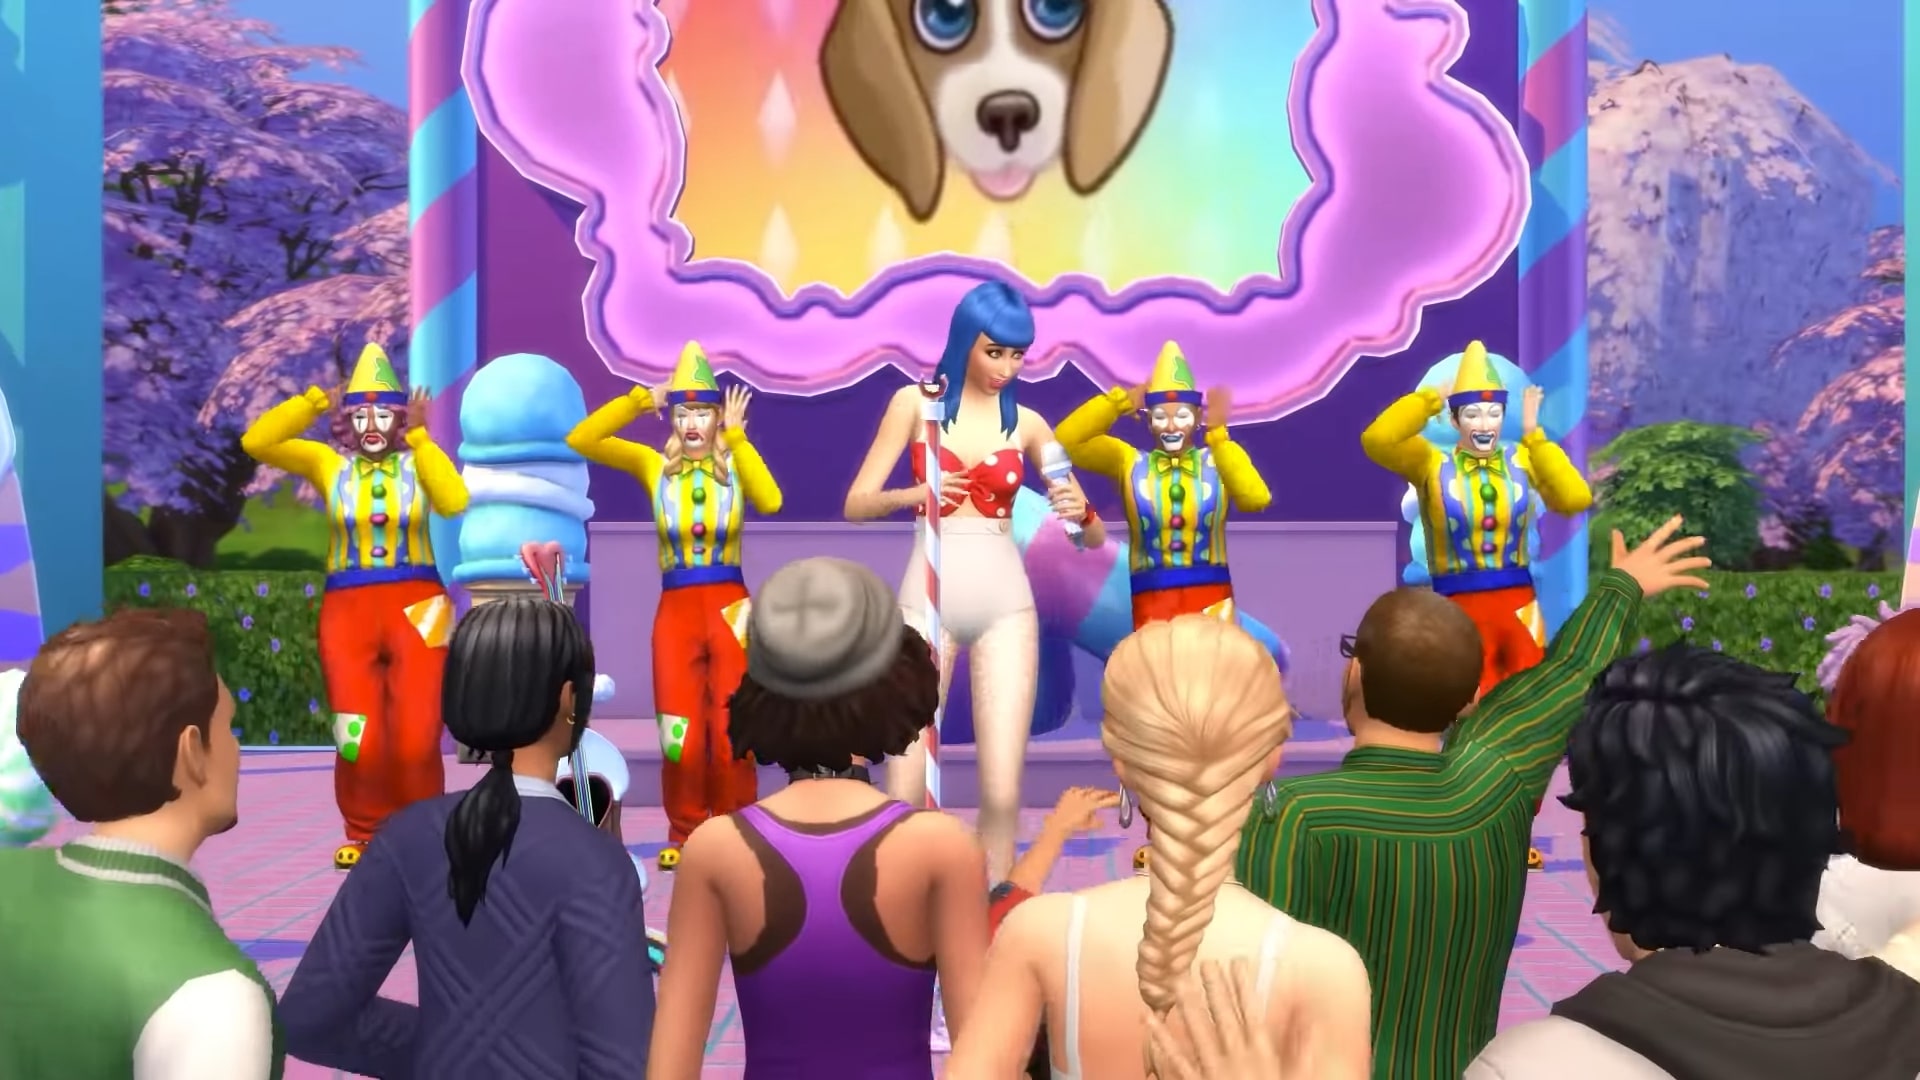 The Sims 4 Sweet Treats - Katy Perry Show with Clows and Props